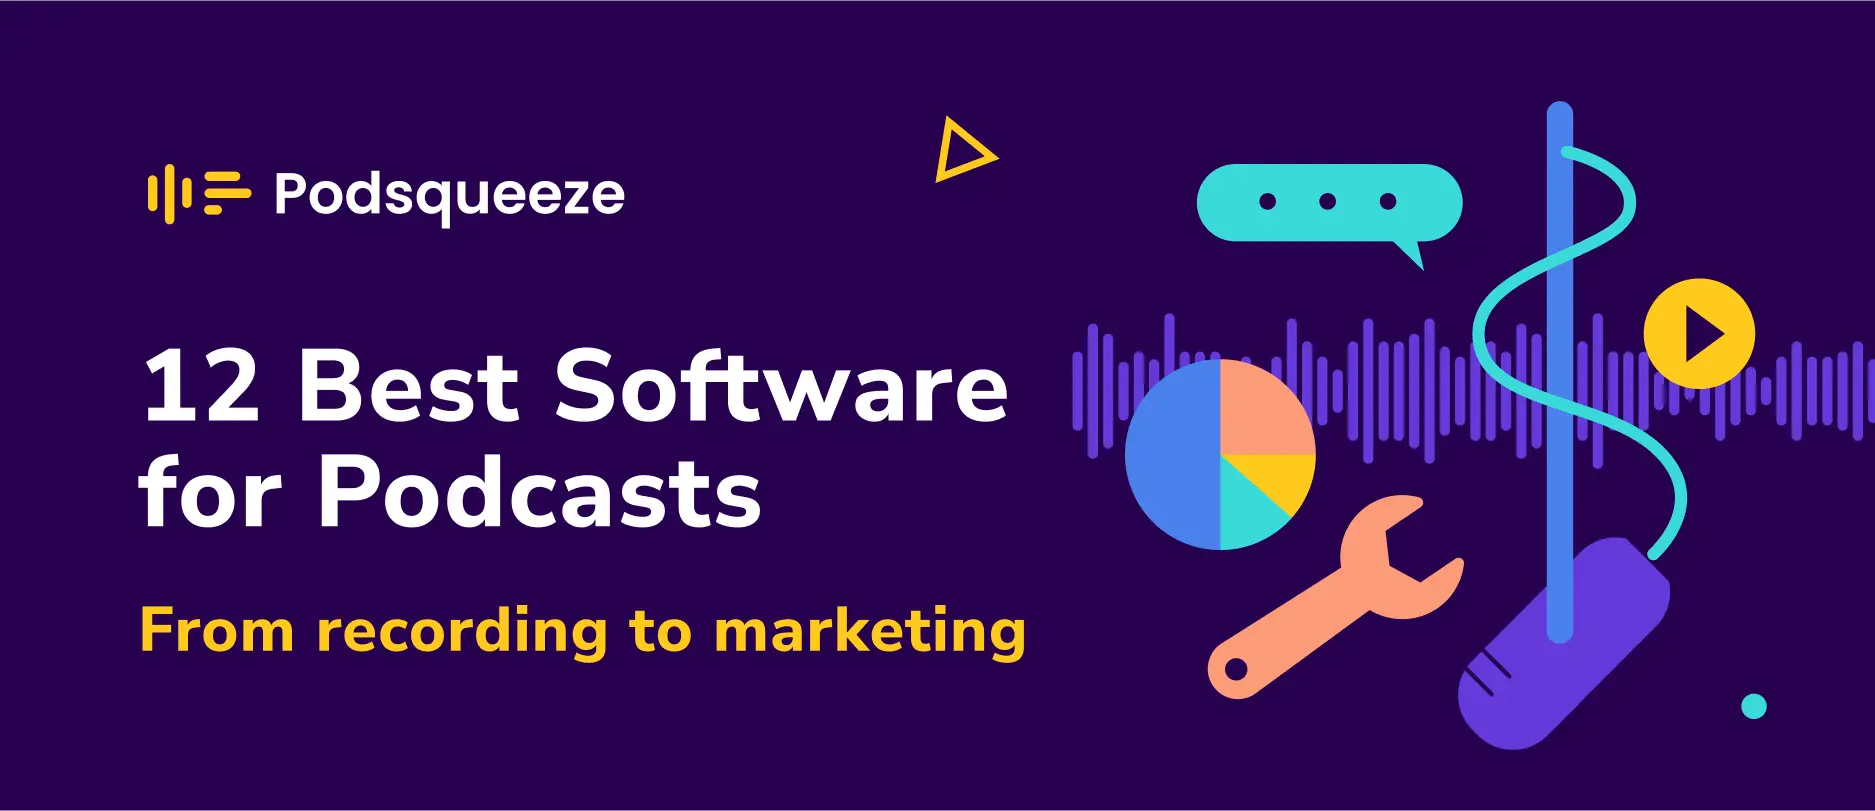 best-software-for-podcasts-cover-article